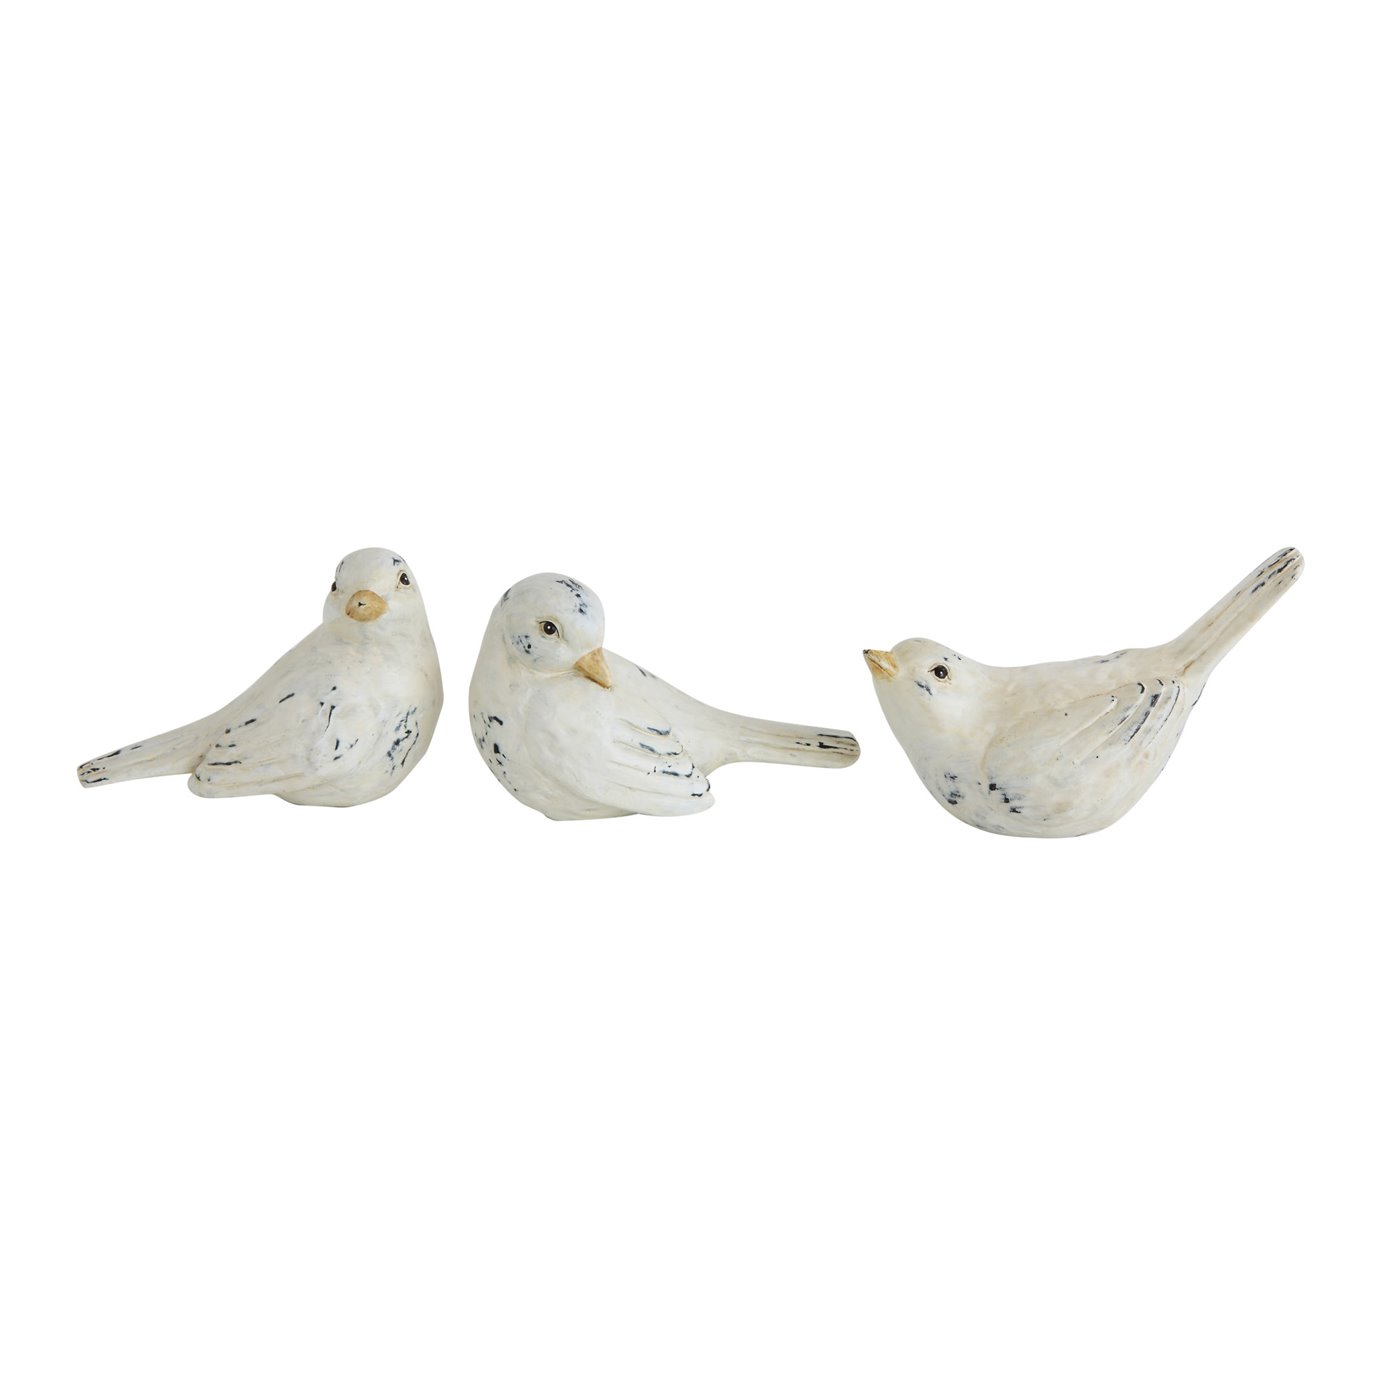 Resin Birds with Distressed White Finishes (Set of 3 Designs)